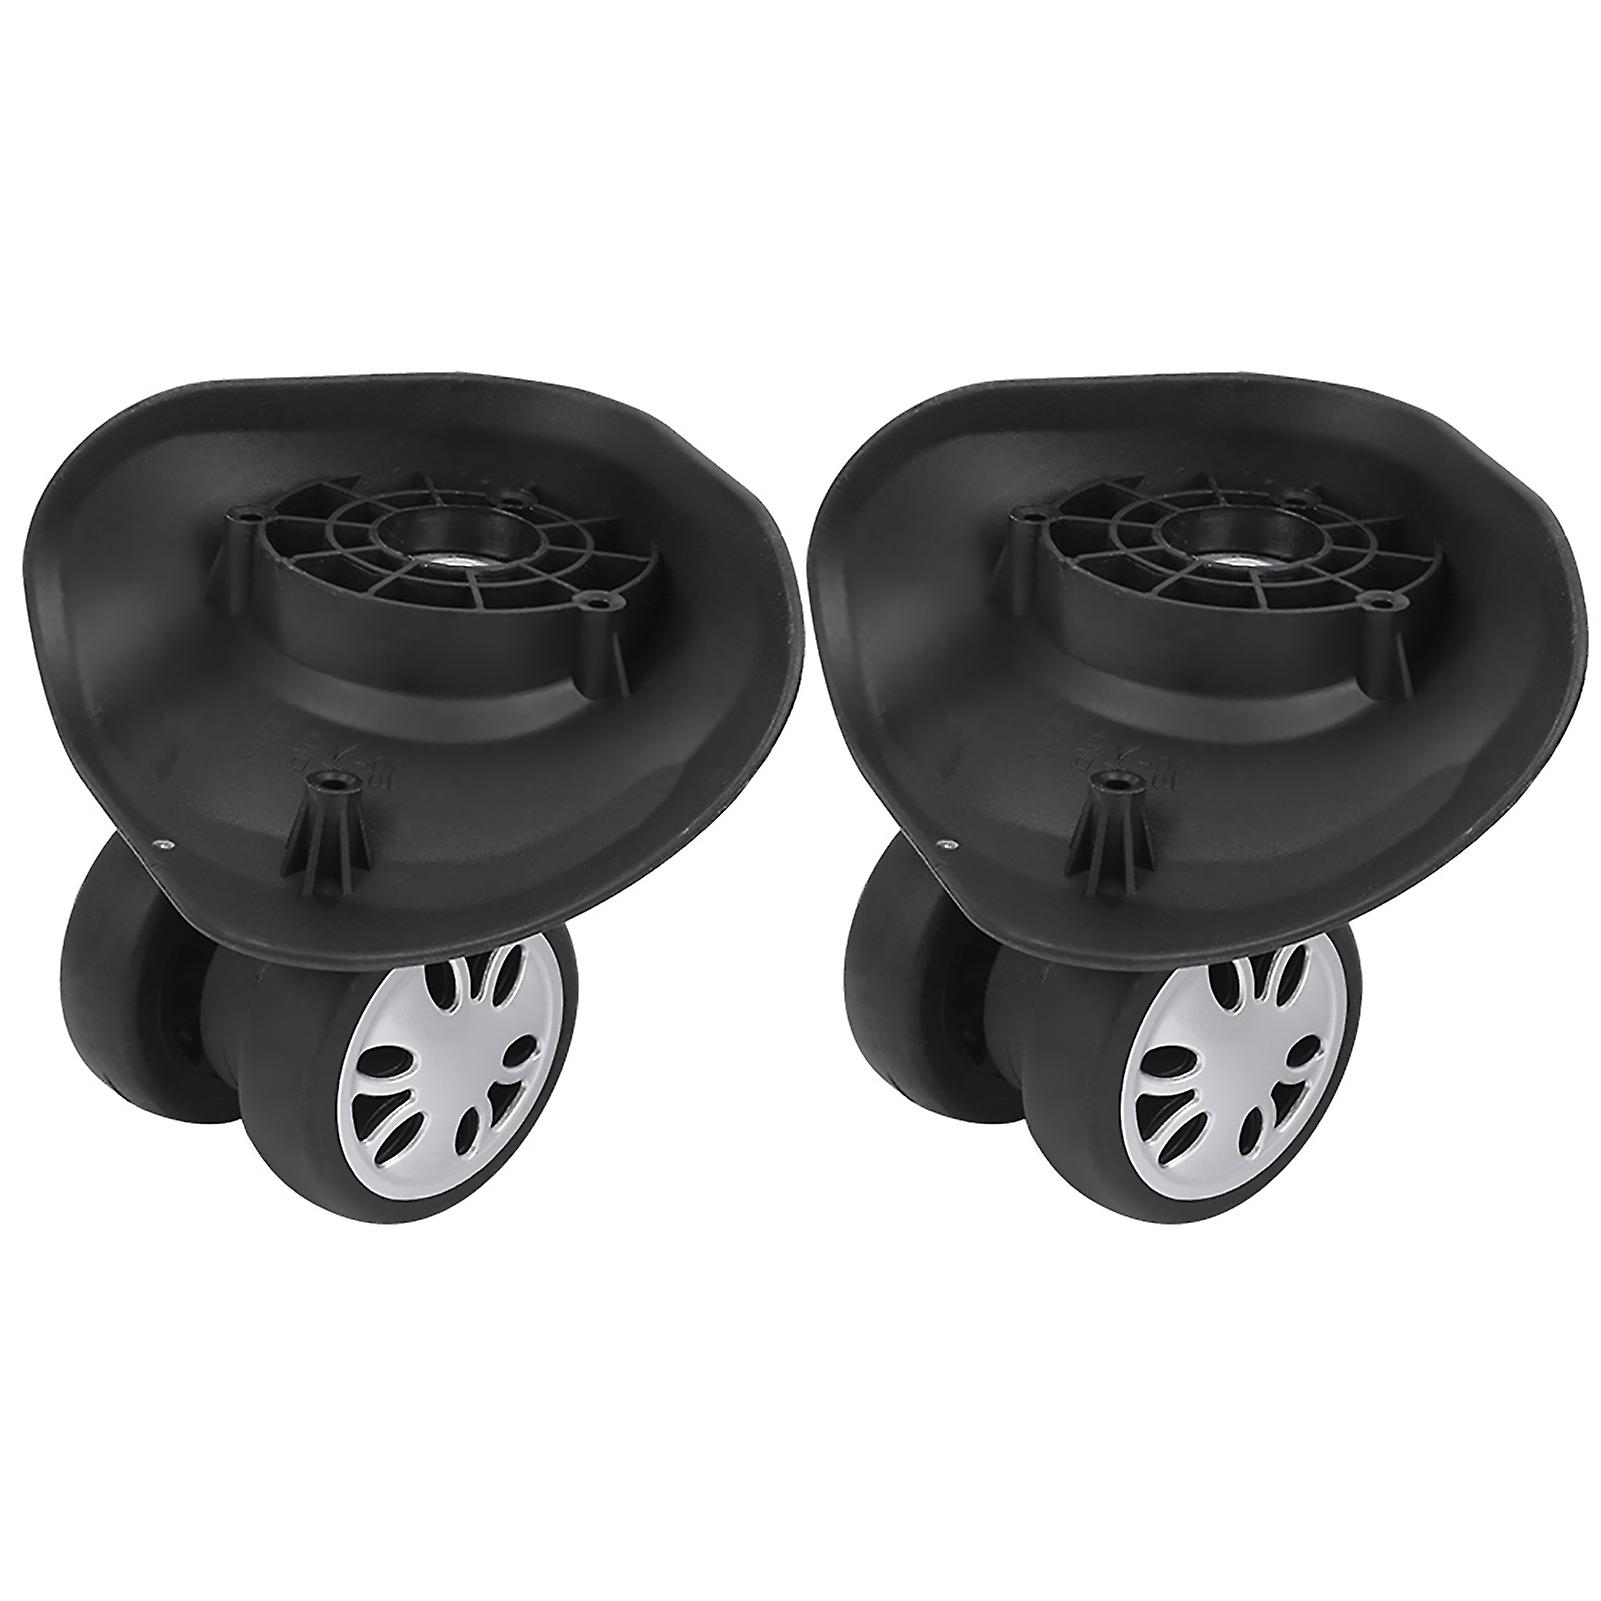 Pair Suitcase Wheel Universal Luggage Carry On Replacement Accessory Outdoor Suppliessmall Black